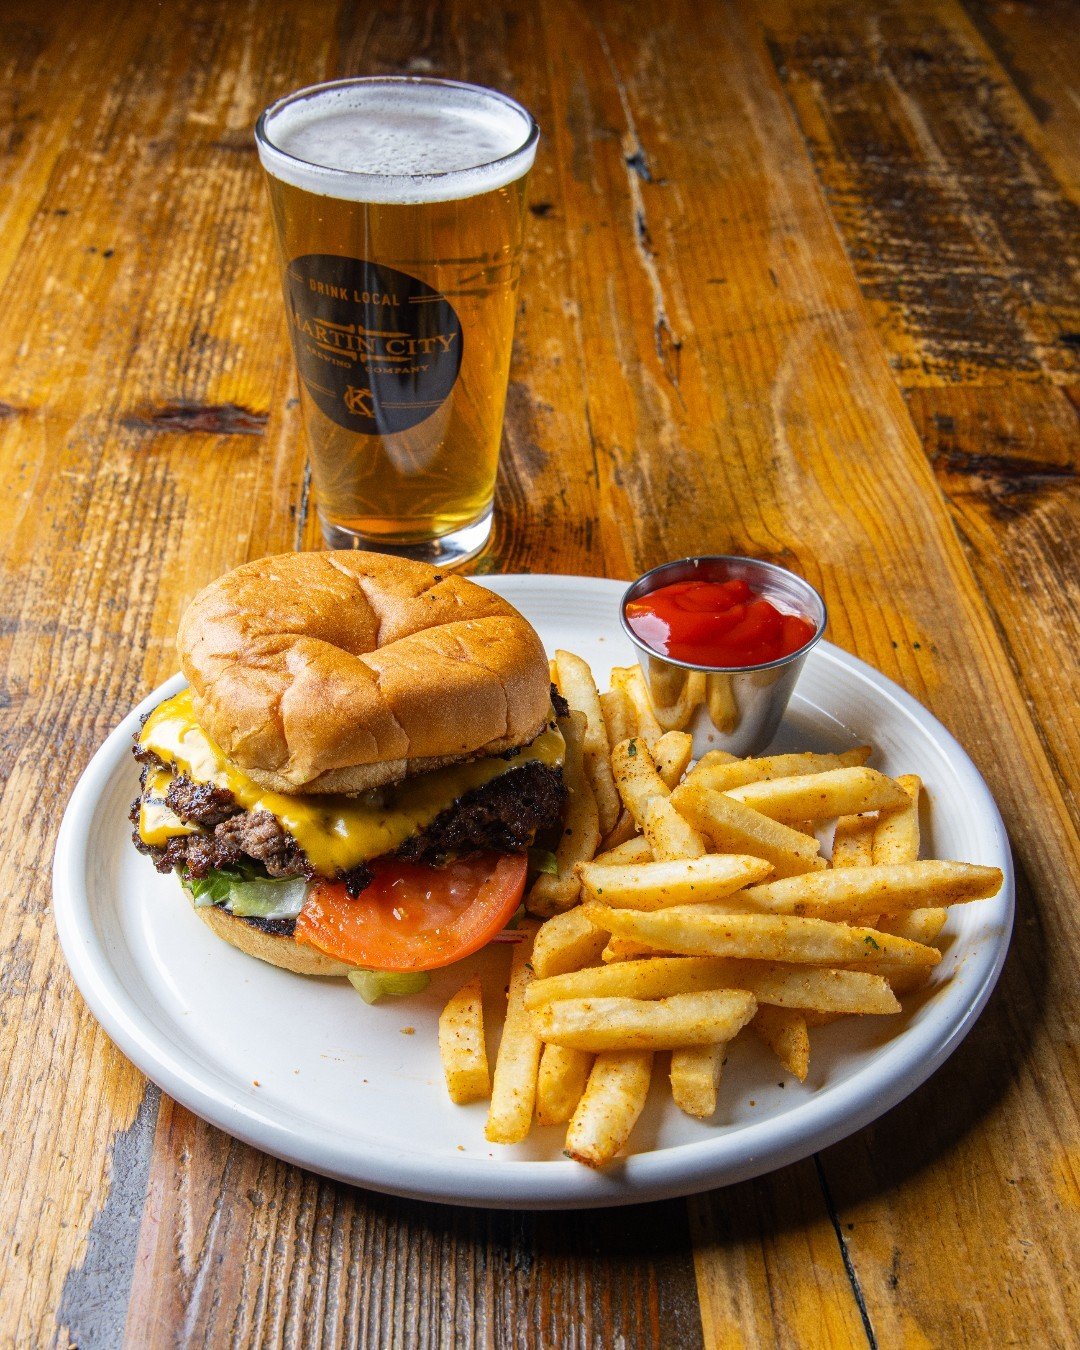 There&rsquo;s nothing 🙅 basic about a big, beautiful burger 🍔 and a bed of hot fries 🍟  with an ice-cold @martincitybrewery beer &ndash; FOR LUNCH‼

👉 Reserve a table: https://bit.ly/3Souk7z
👉 Order Carryout: https://bit.ly/3ISncMF